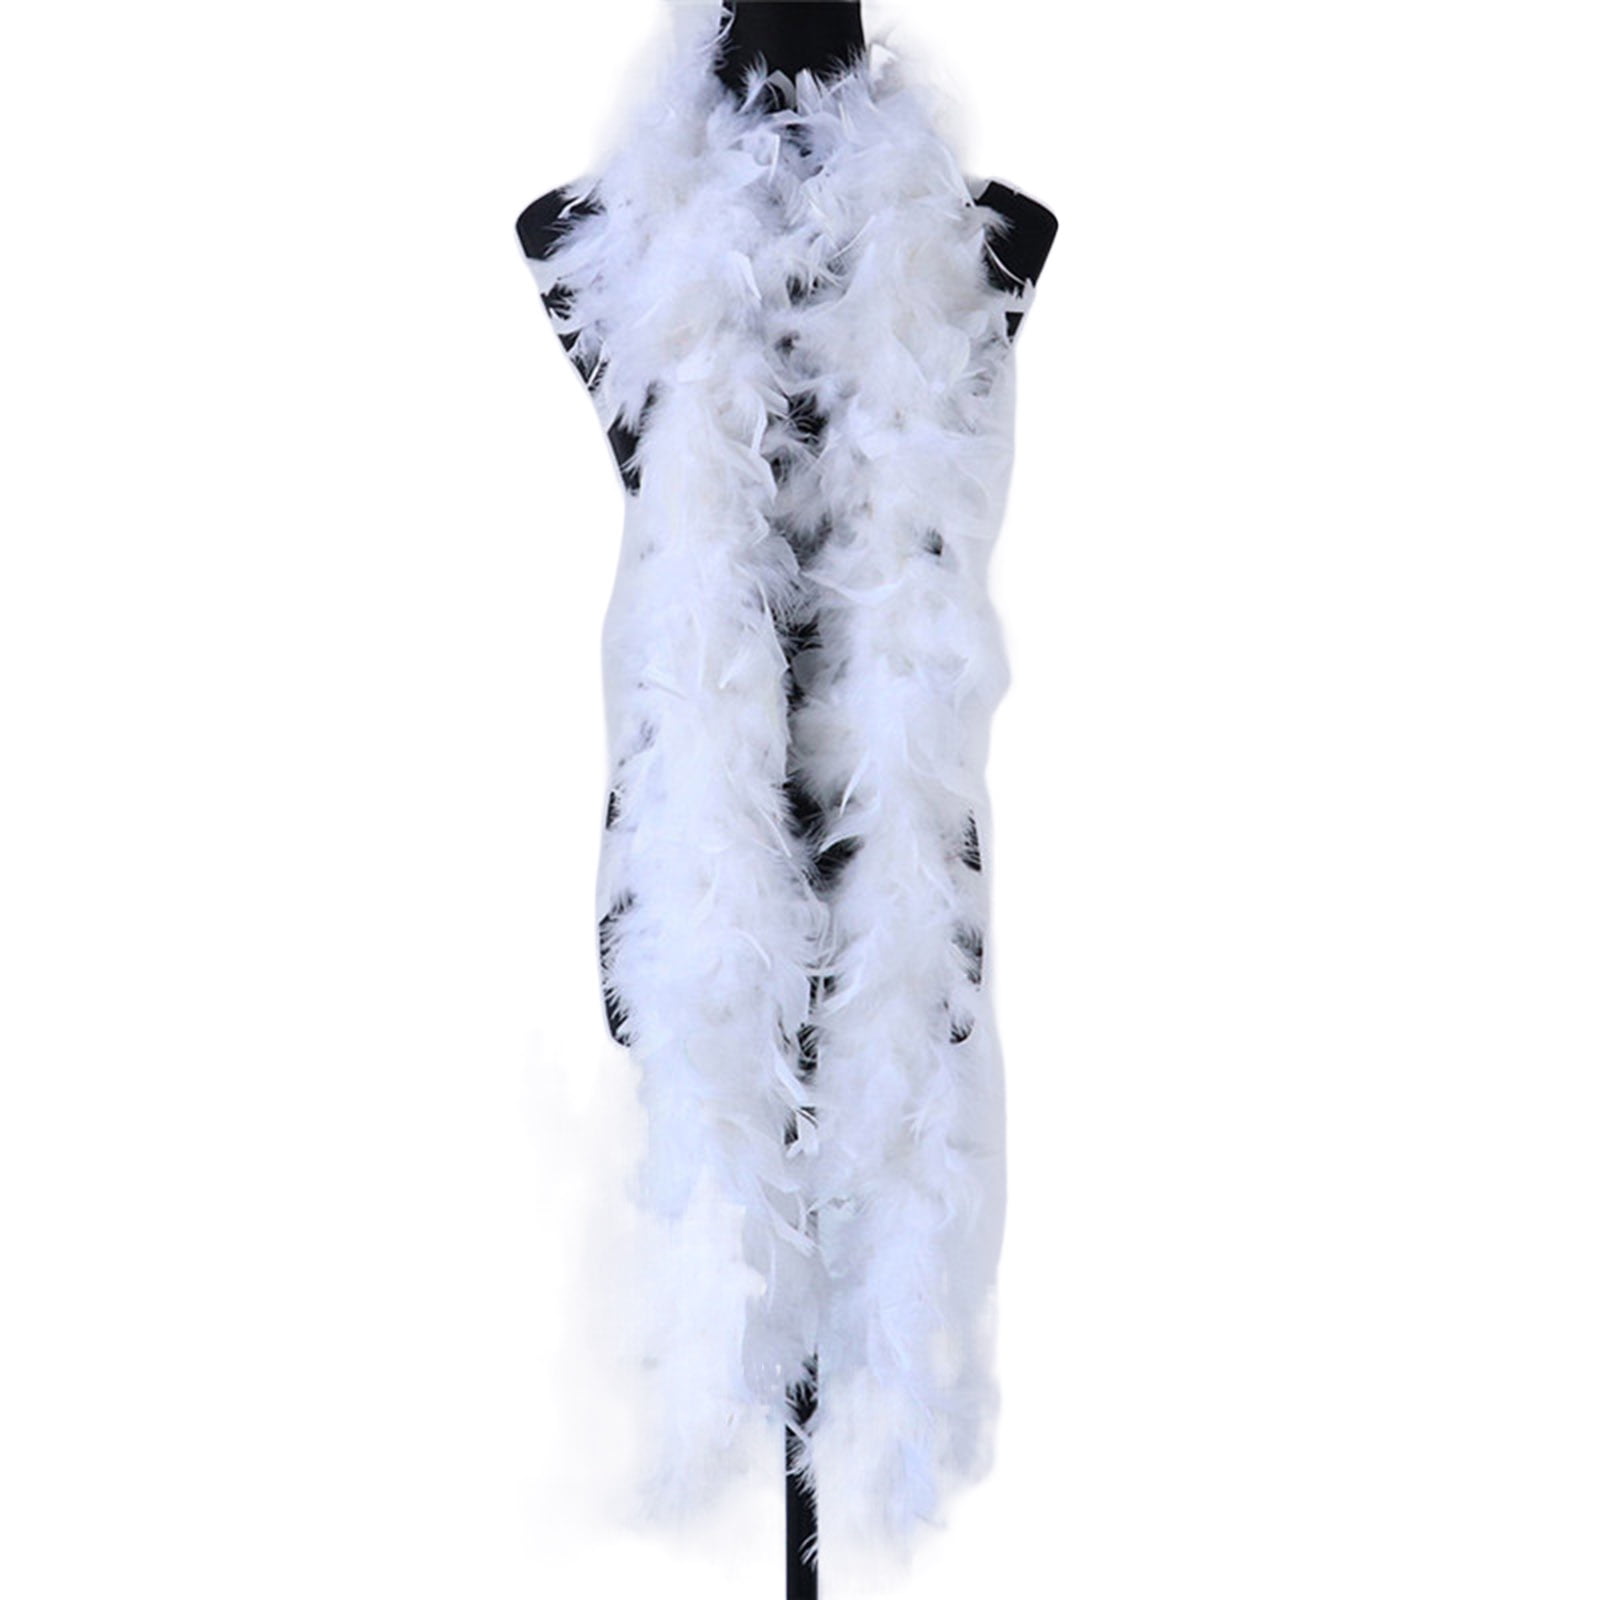 1pc- Costume Decoration White Feather boa Feather Cape Shawl DIY Craft Home  Dance Turkey Feather Boa Puffy Feather Boa Perfect for parties, costumes,  wedding parties, concerts and home decor Christmas decorations Christmas